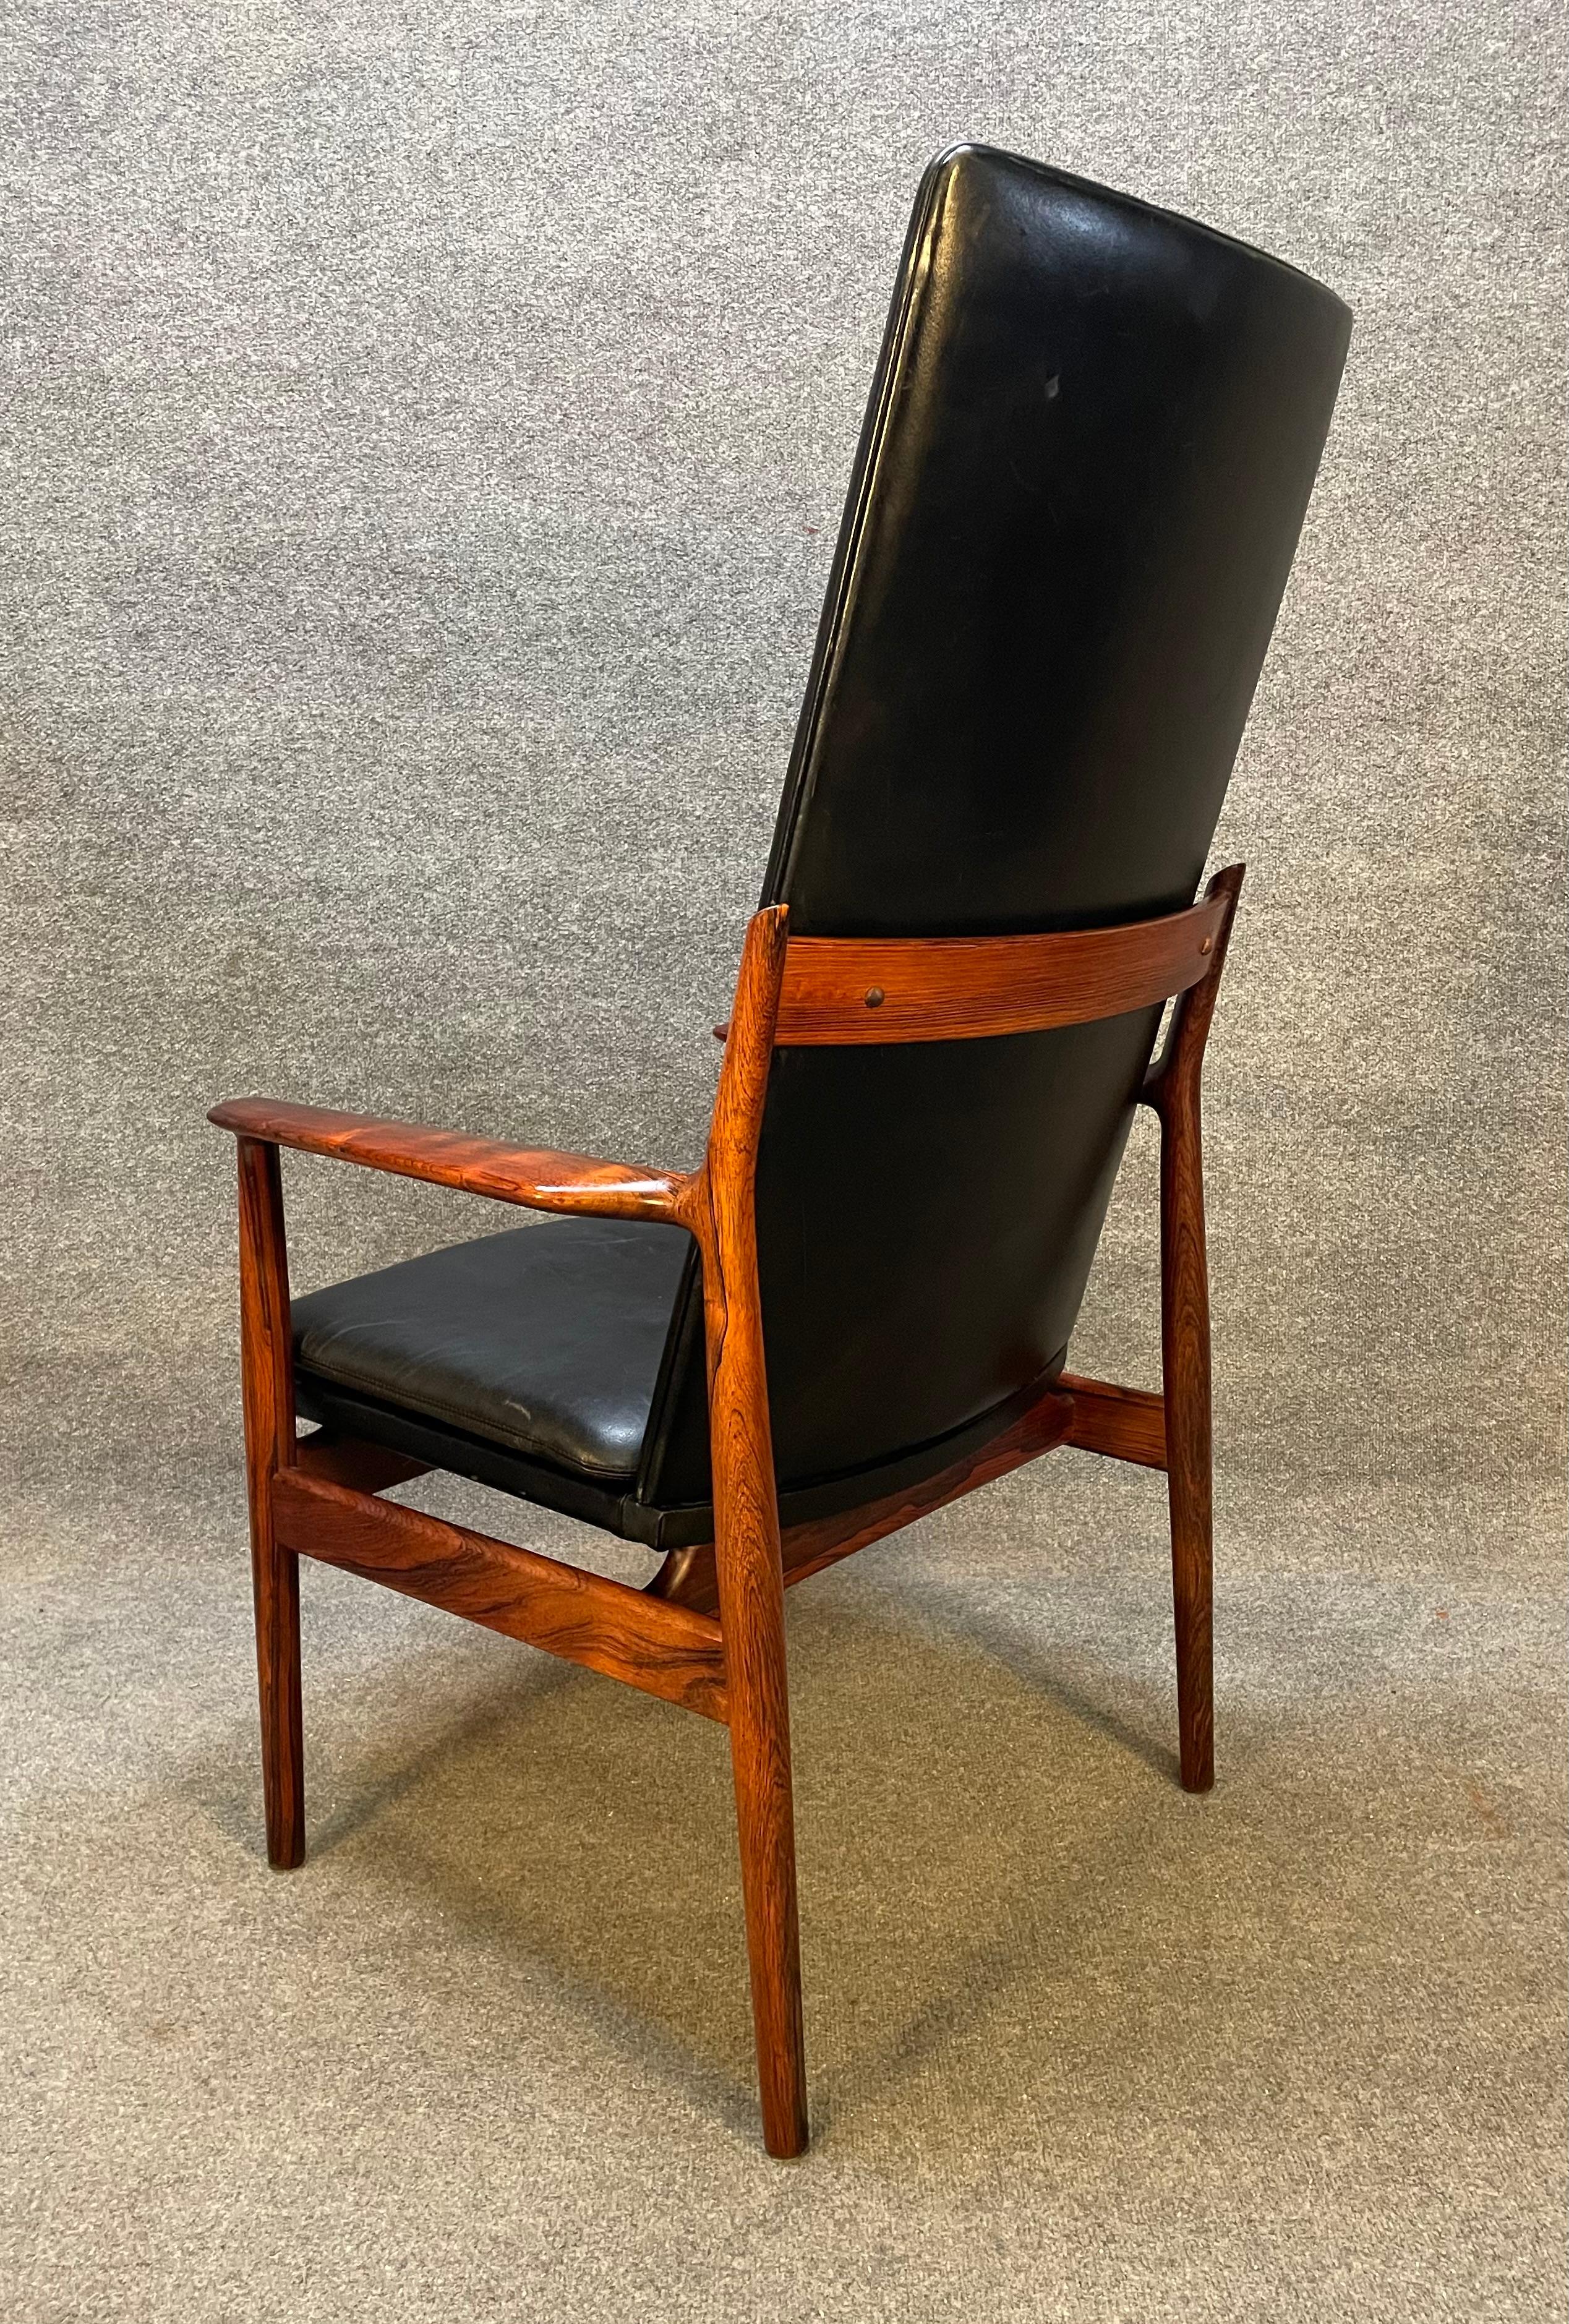 Vintage Danish Mid Century Rosewood Executive Chair by Arne Vodder for Sibast 1